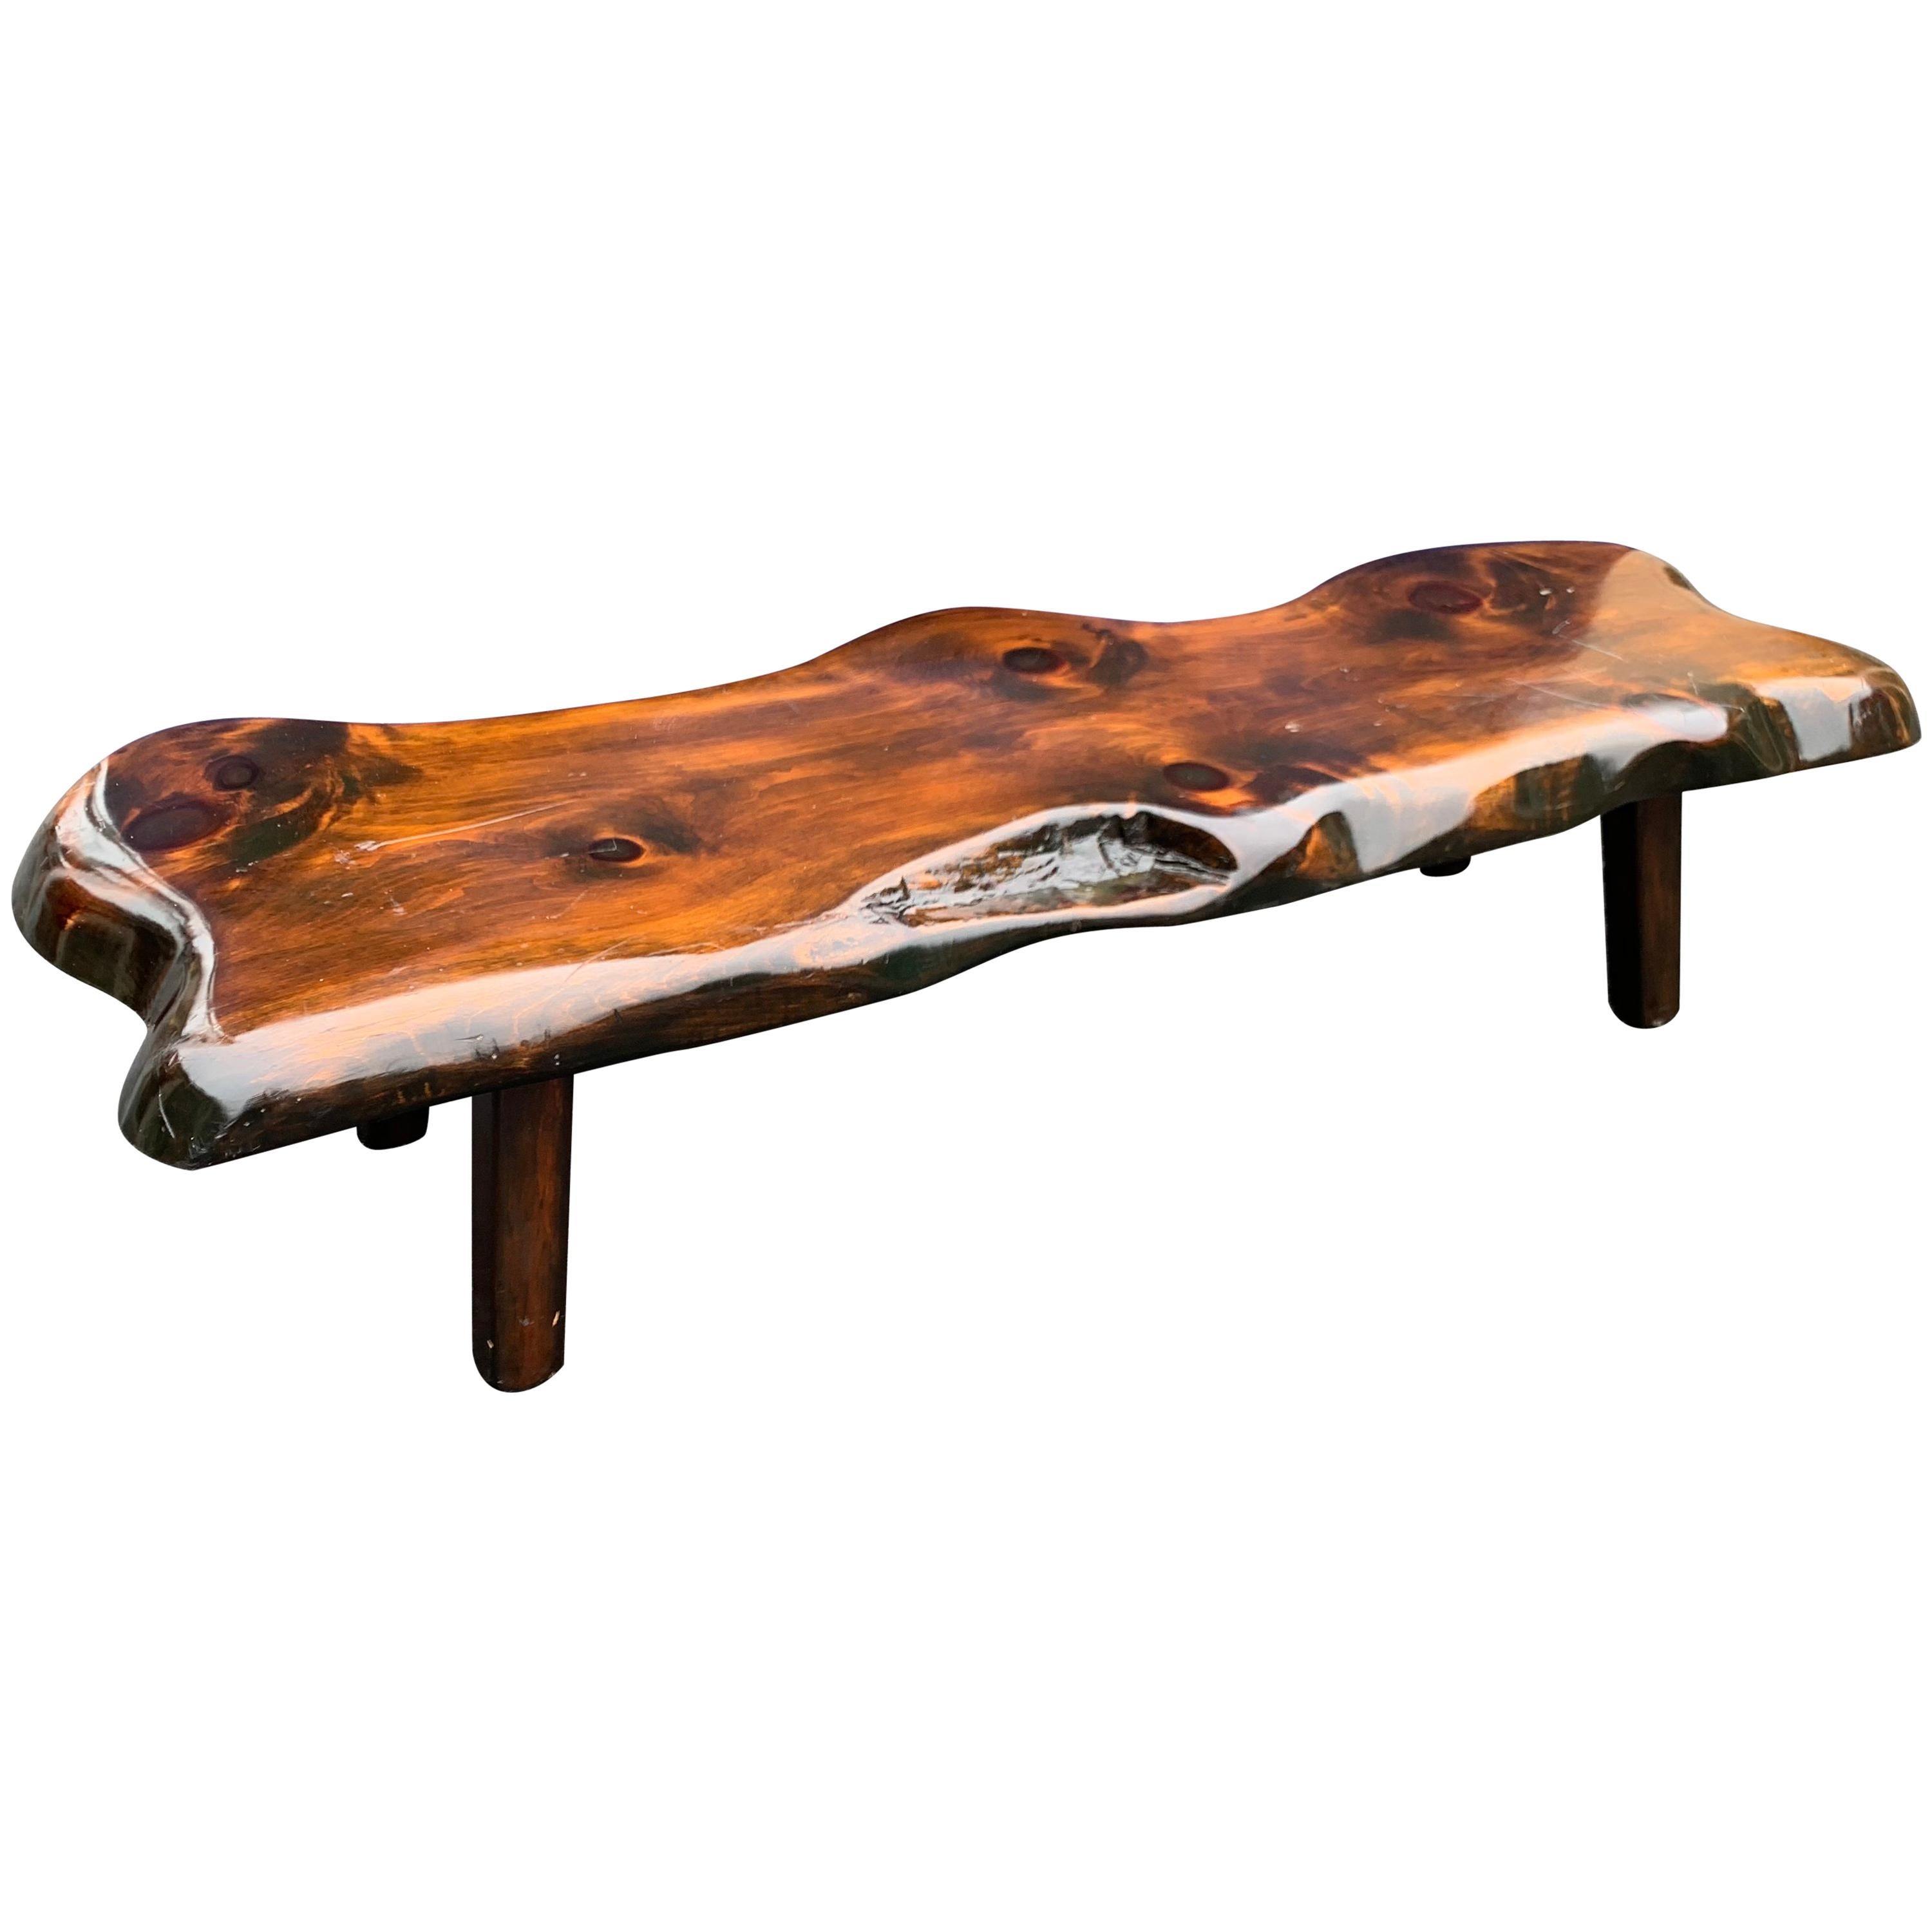 Large Wooden Folk Art Bench Or Cocktail Table For Sale